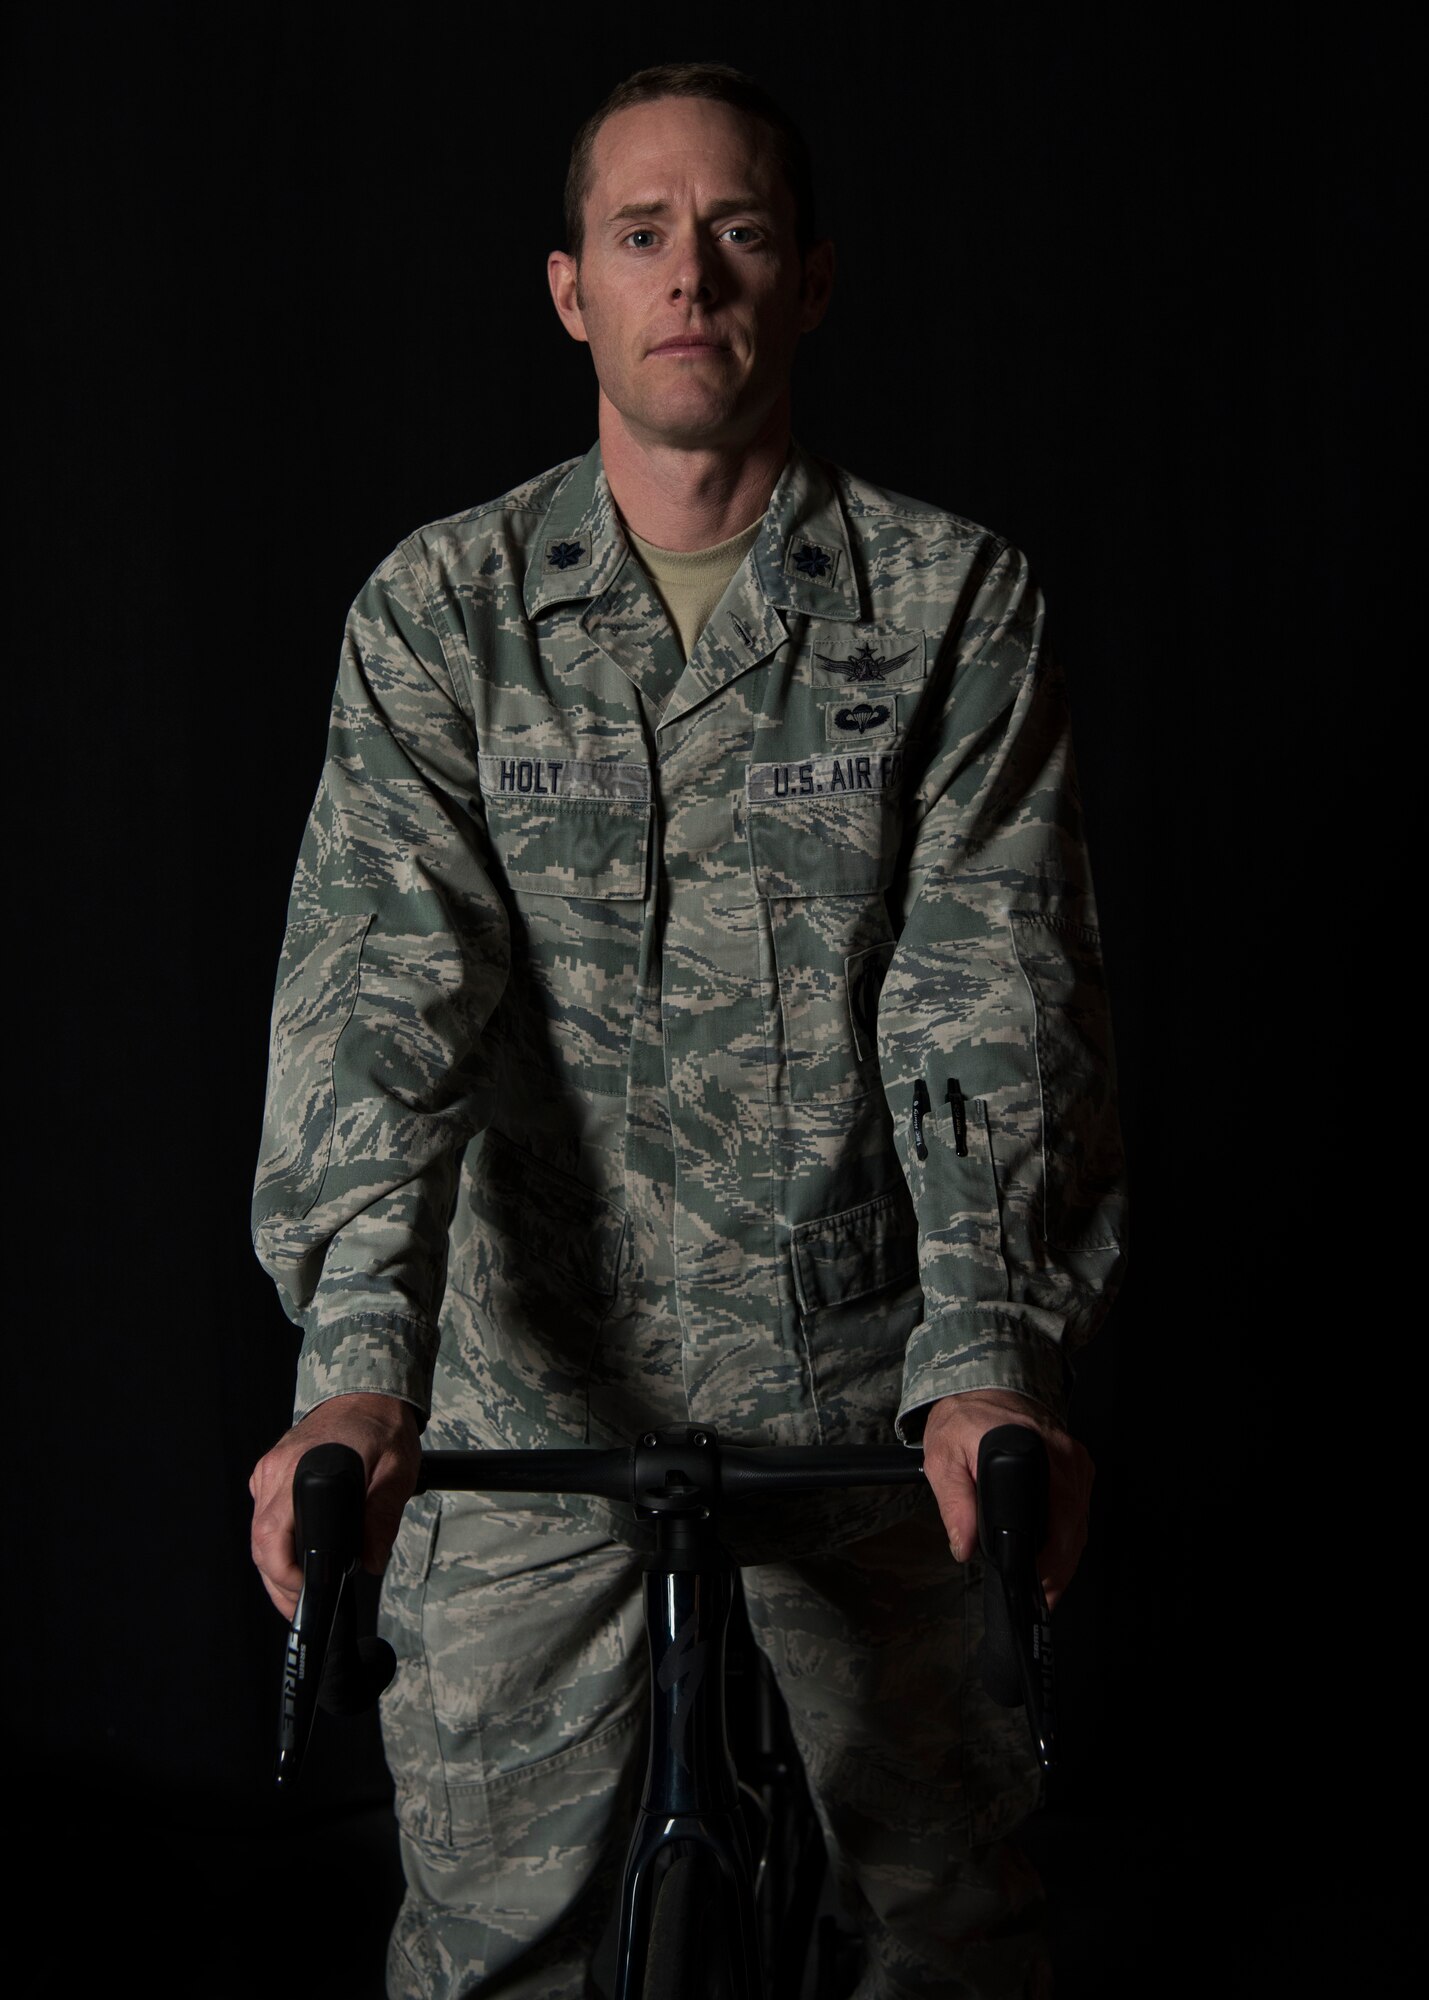 Lt. Col. Ian Holt, 614th Air Operation Center current ops branch chief, poses with his bicycle Nov. 27, 2019 at Vandenberg Air Force Base, Calif. Holt participated in the cycling division during the 2019 Military World Games, which were held Oct. 18–27, 2019 in Wuhan, China. (U.S. Air Force photo by Airman 1st Class Aubree Milks)